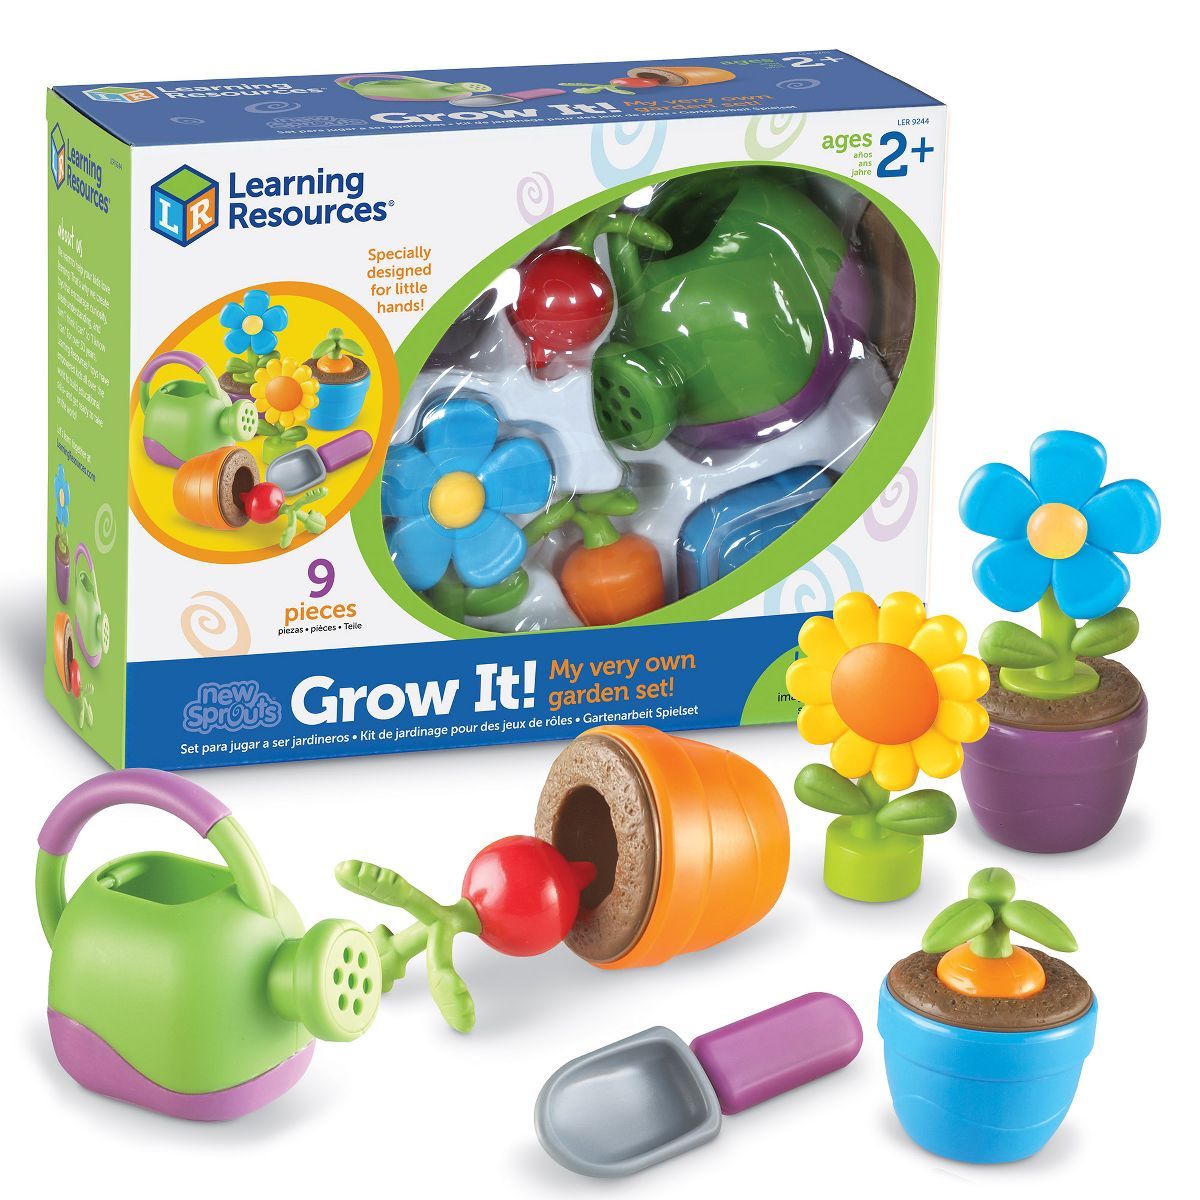 Learning Resources - New Sprouts Grow It! Play Set, 9 Pieces, Ages 2+ | Target